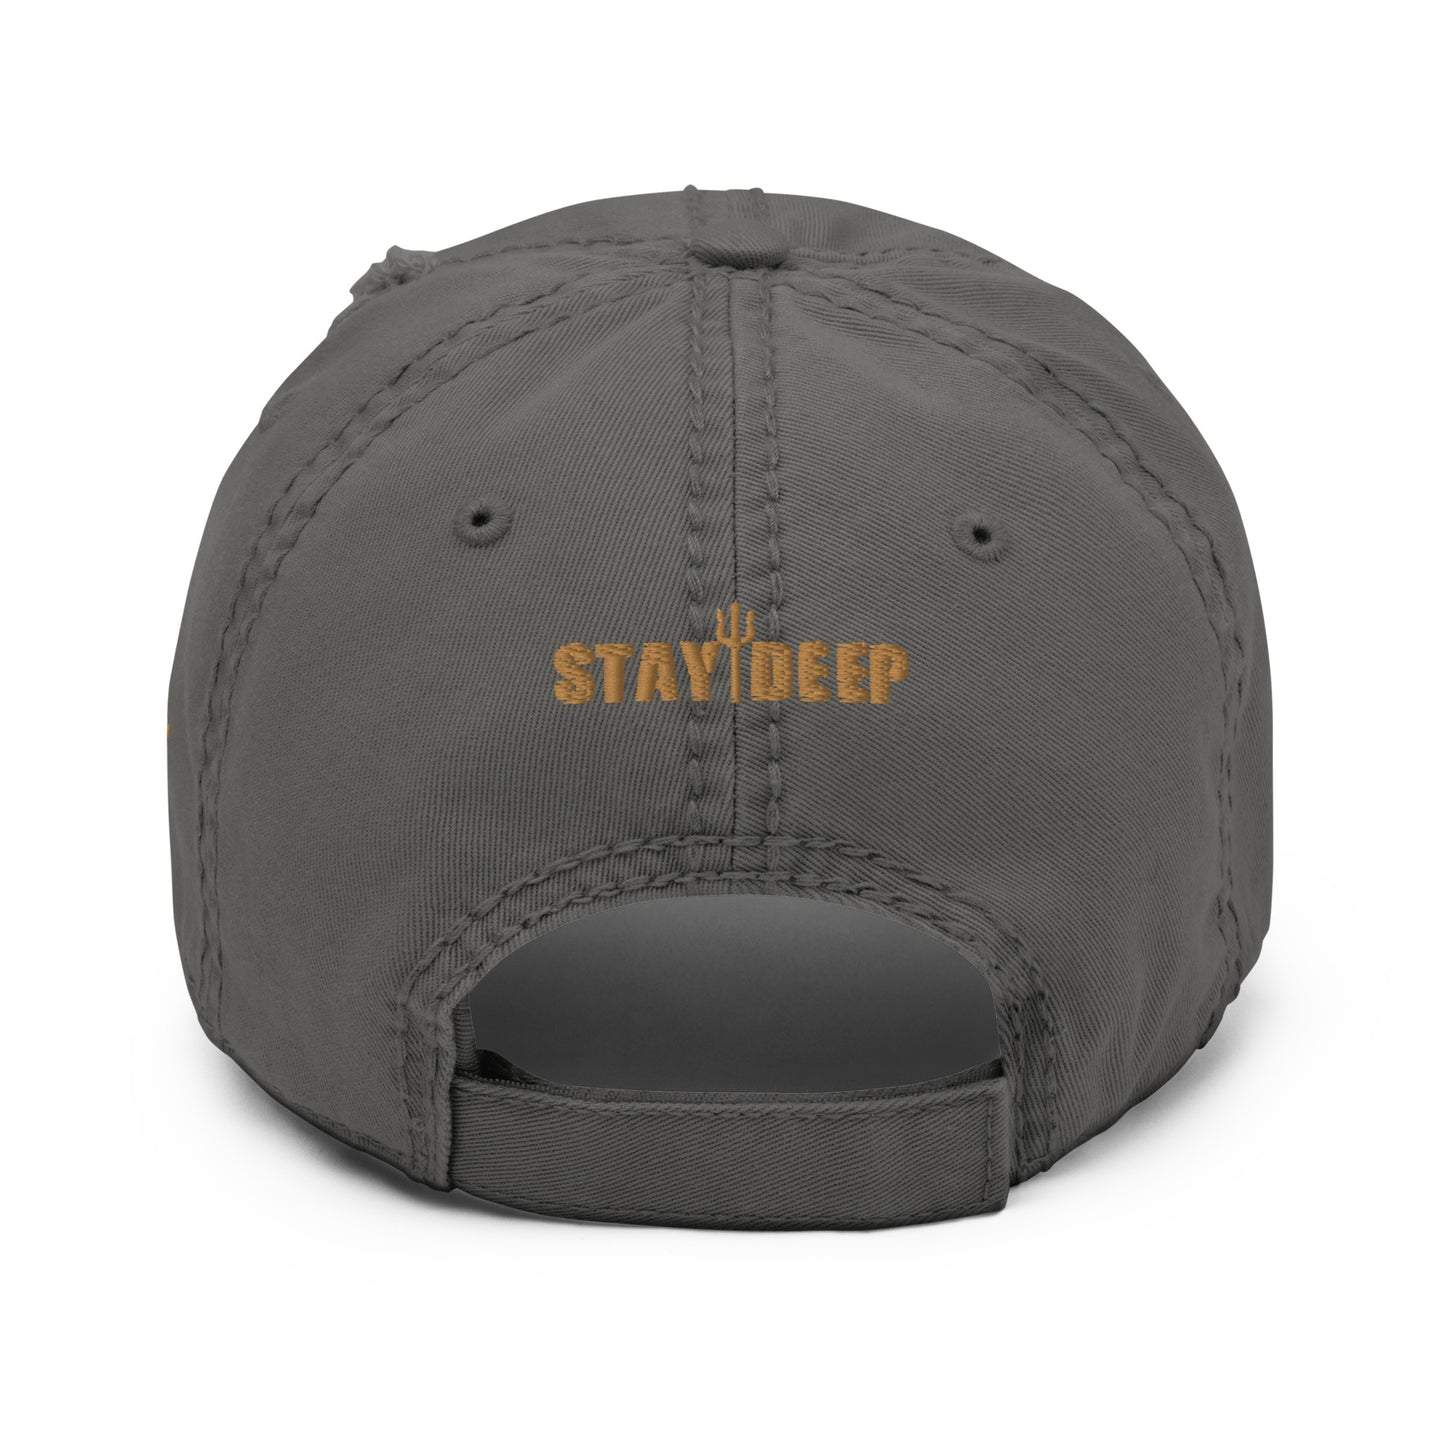 DIVER / STAY DEEP Distressed Dad Hat